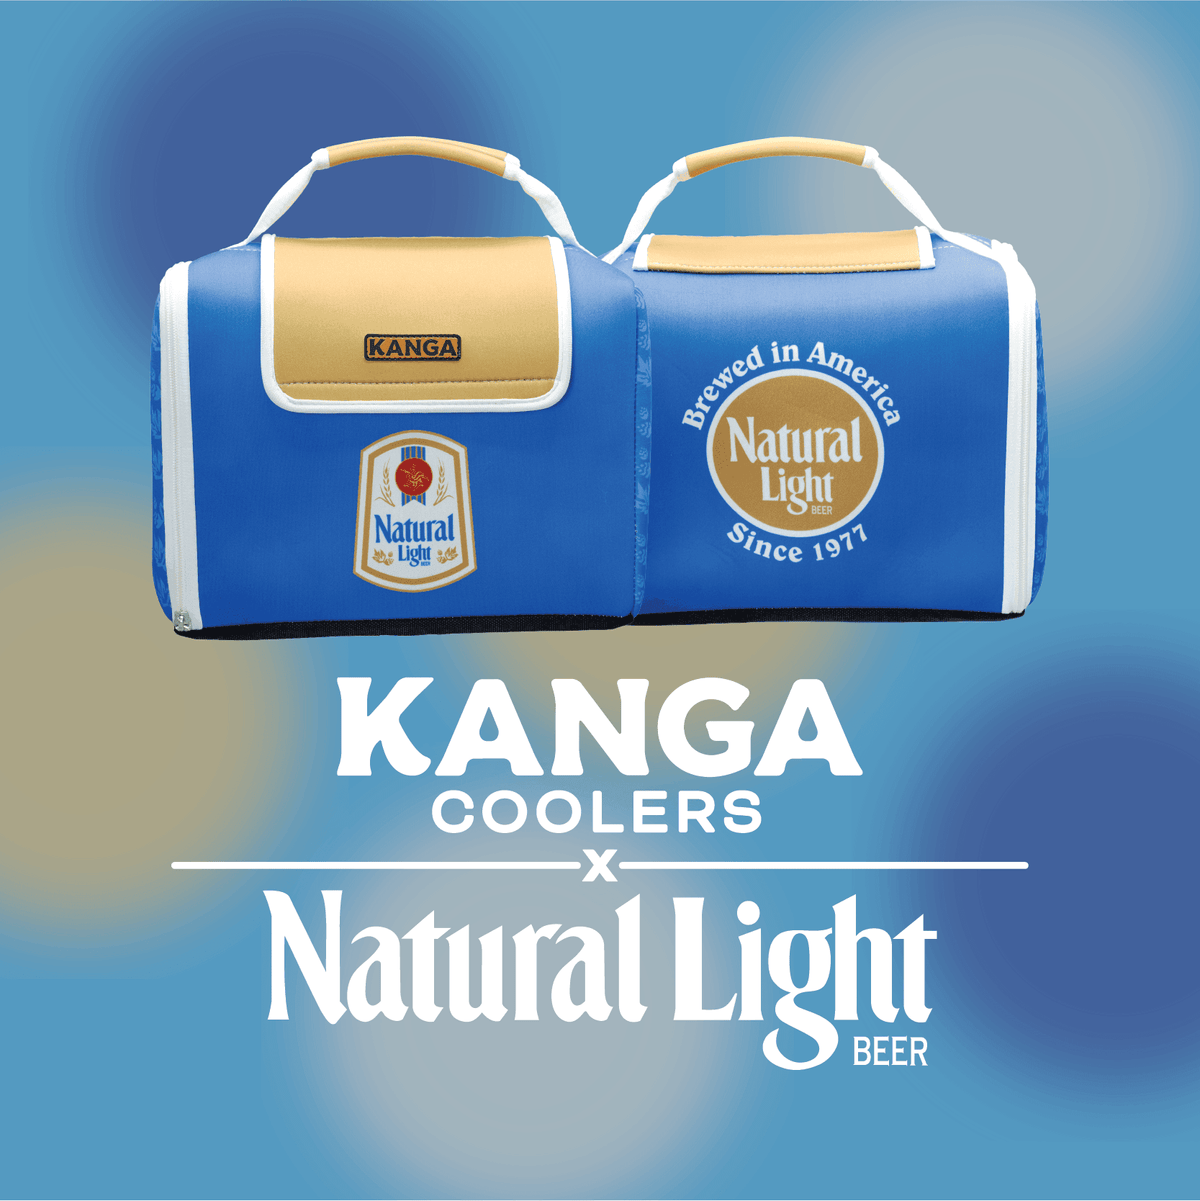 https://www.shopbeergearusa.shop/wp-content/uploads/1693/26/now-you-can-get-the-top-natural-light-vintage-kanga-12-pack-kase-mate-natural-light-at-unbeatable-cost_4.png